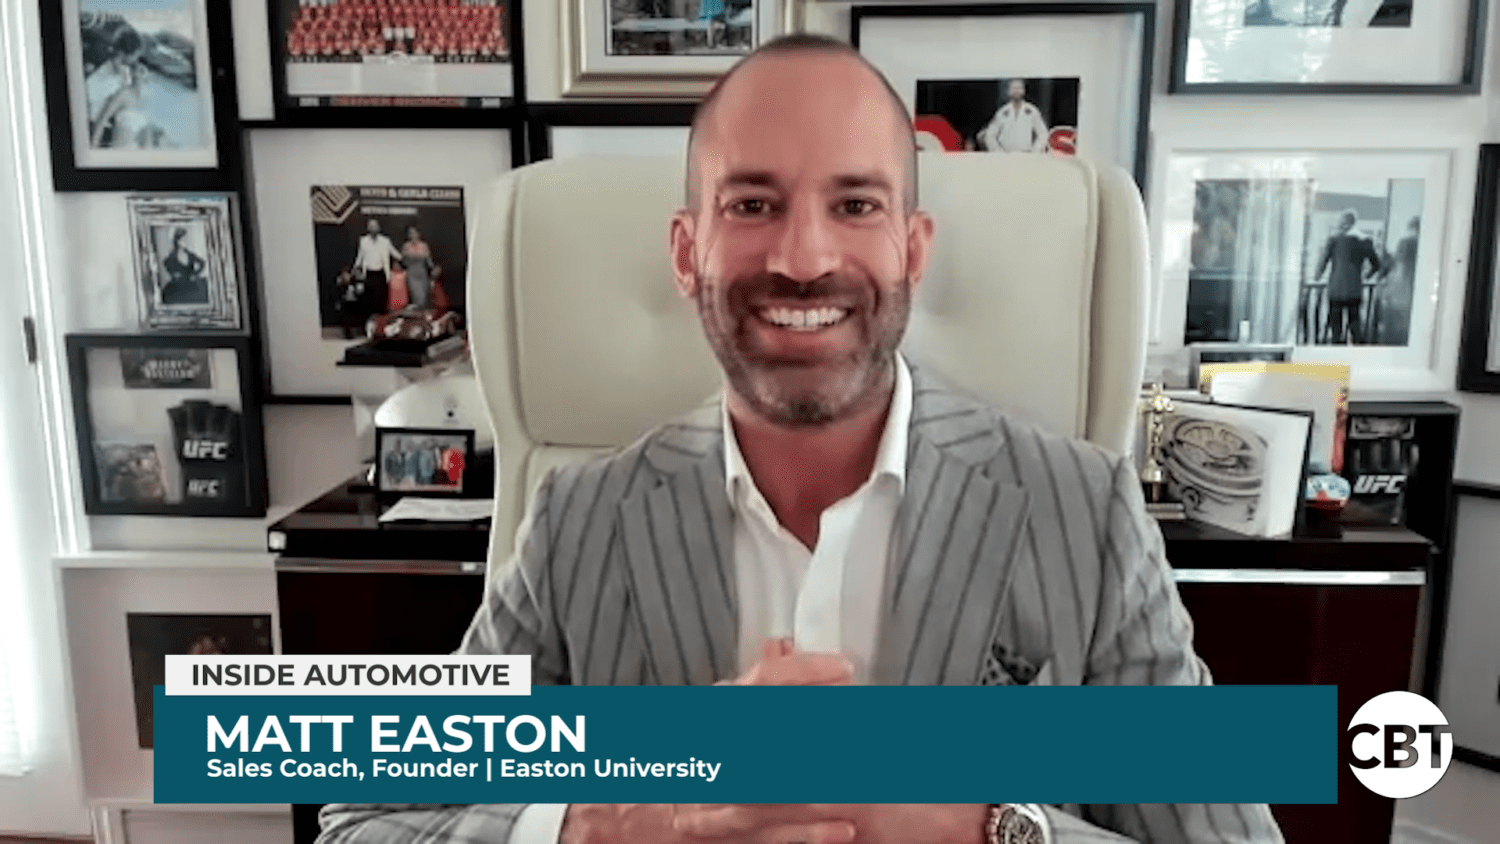 Matt Easton, founder of the Easton University, joins Jim Fitzpatrick on Inside Automotive to share a few of his “power questions."